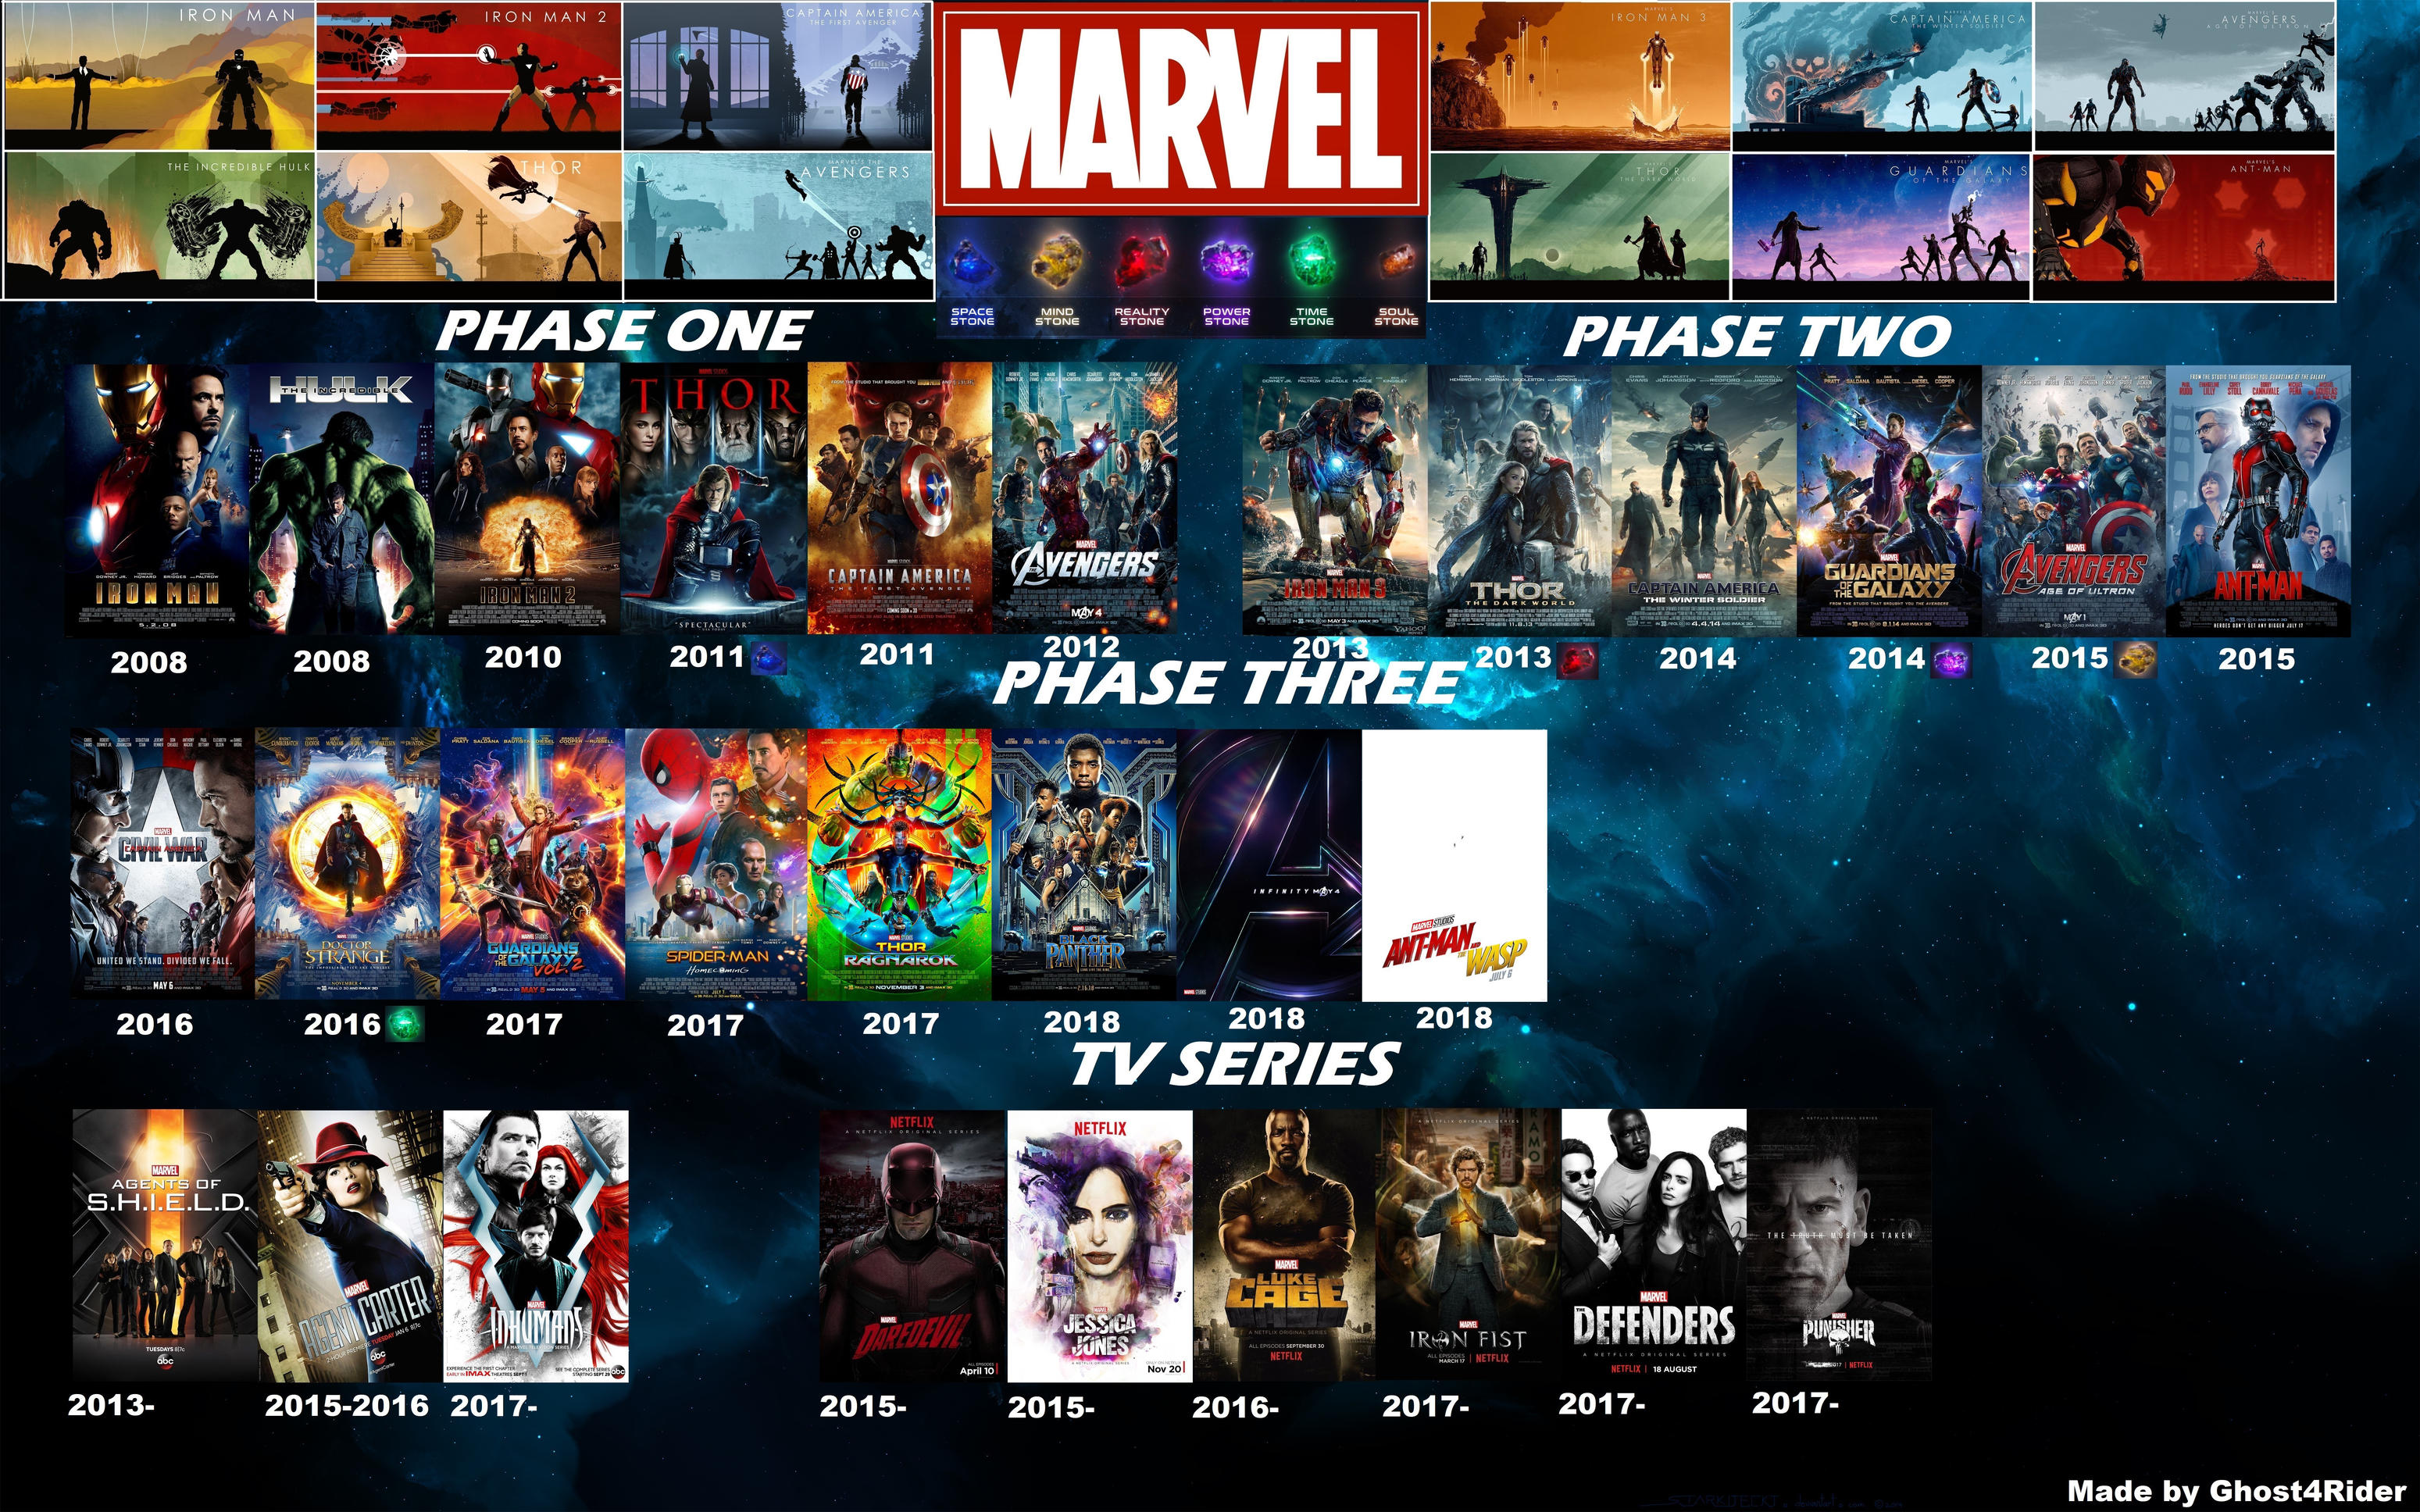 Marvel Cinematic Universe Timeline by Ghost4Rider by